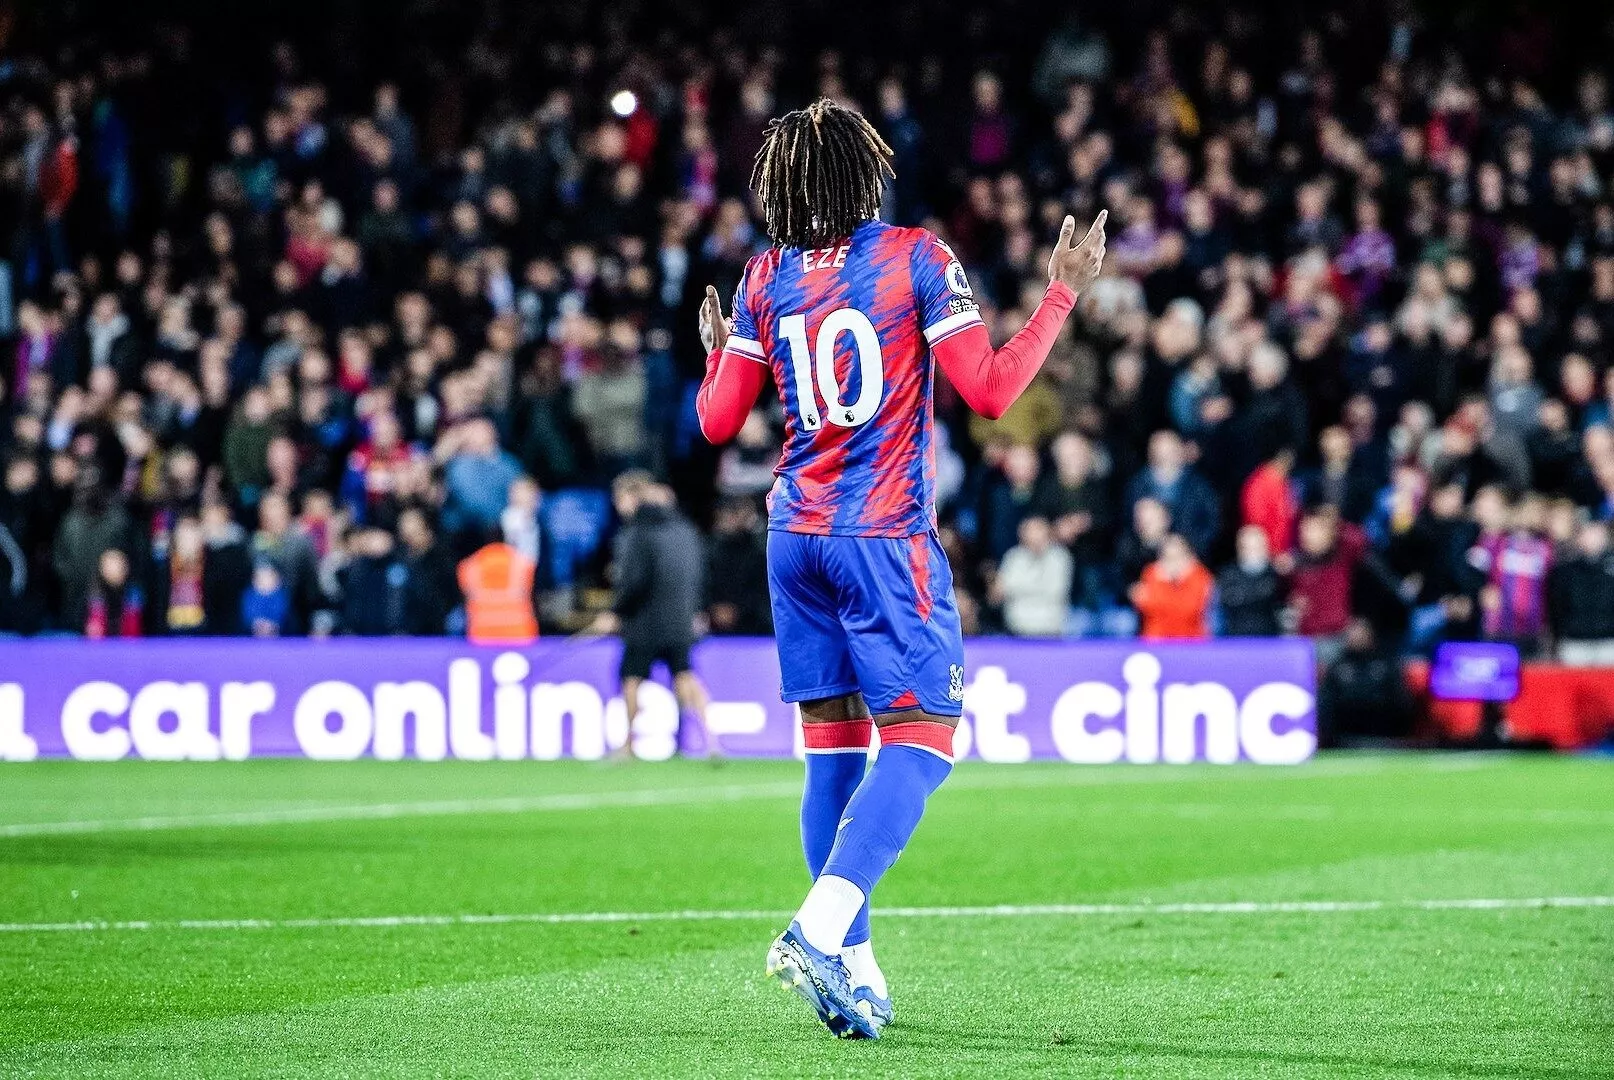 Crystal Palace set to offer new contract to Eberechi Eze